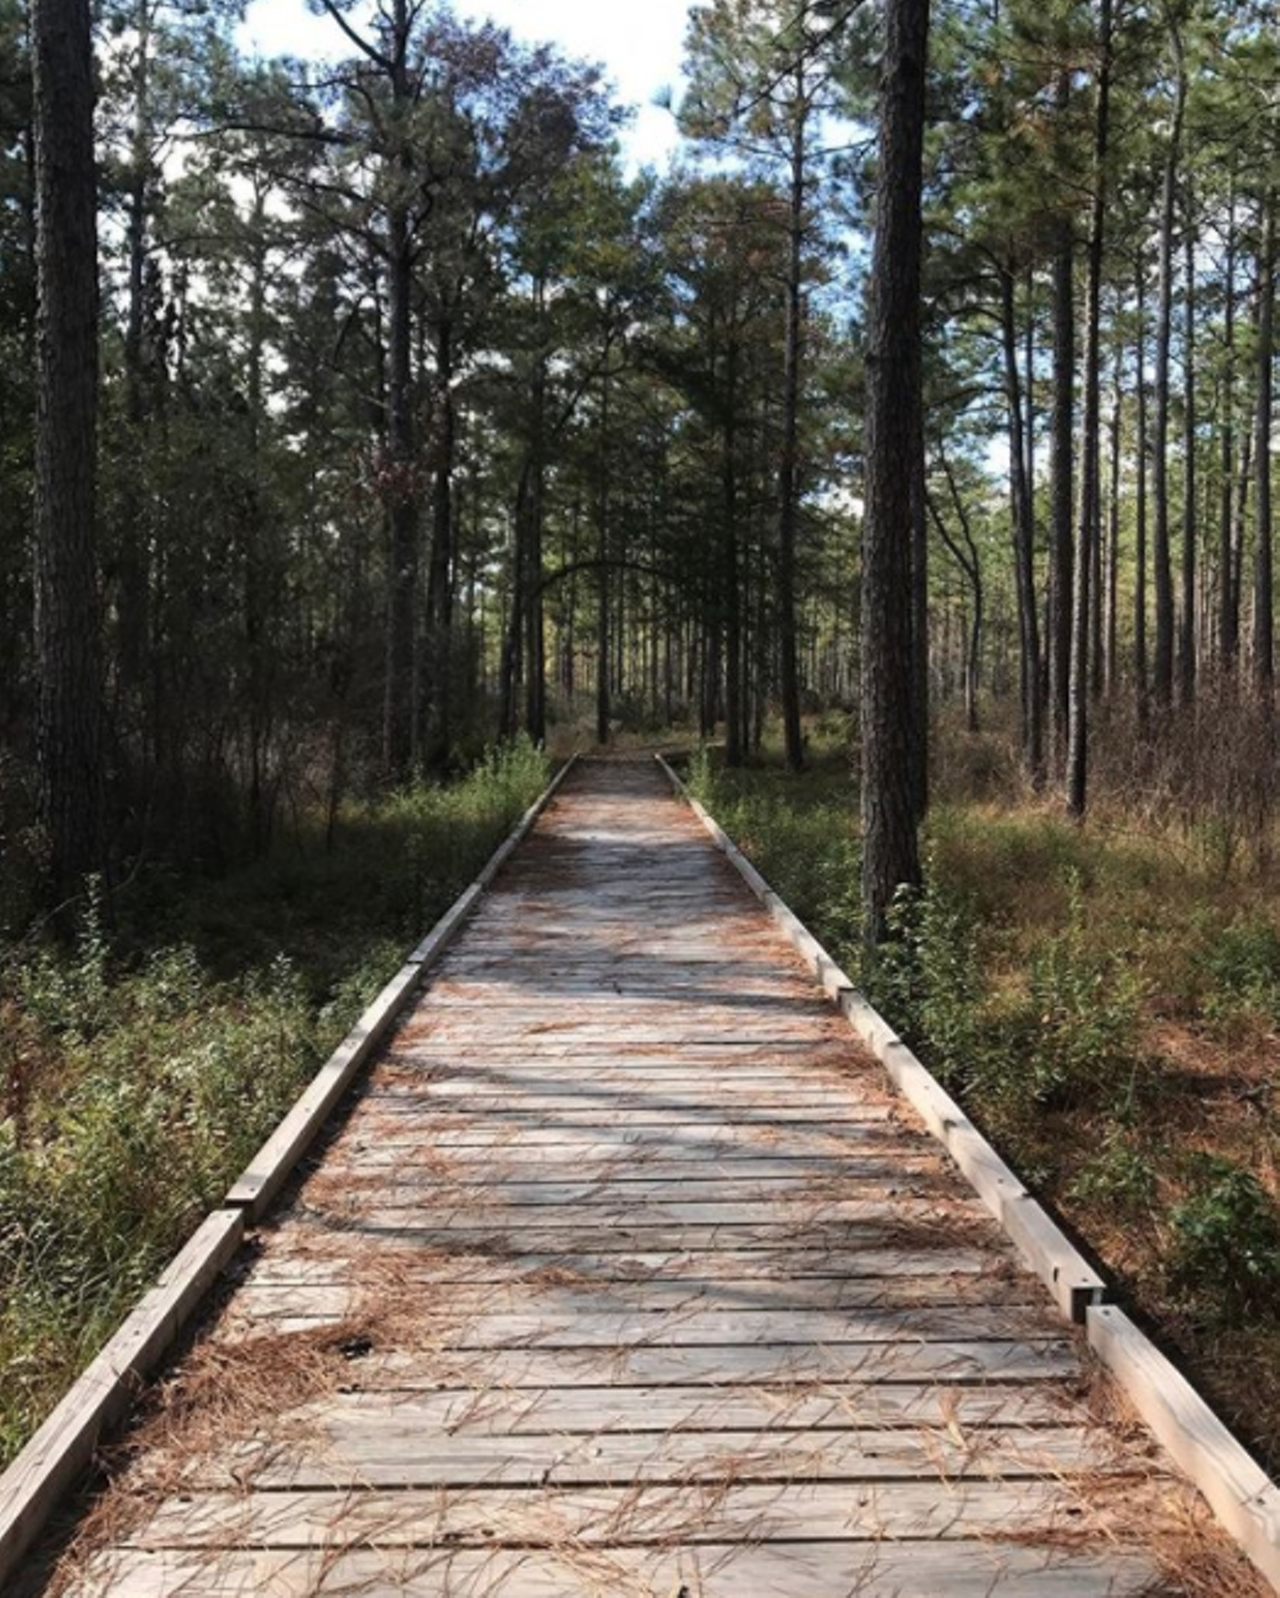 Big Thicket National Preserve
FM 420, Kountze, (409) 951-6800
We’ve all been to Garner, Lost Maples and Enchanted Rock since they’re so close to San Antonio, but treat you and the fam (or crew) out to Kountze to take in Big Thicket National Preserve. Here you’ll be able to hike and paddle, and there’s special activities just for the kids.
Photo via Instagram / hayley___lou